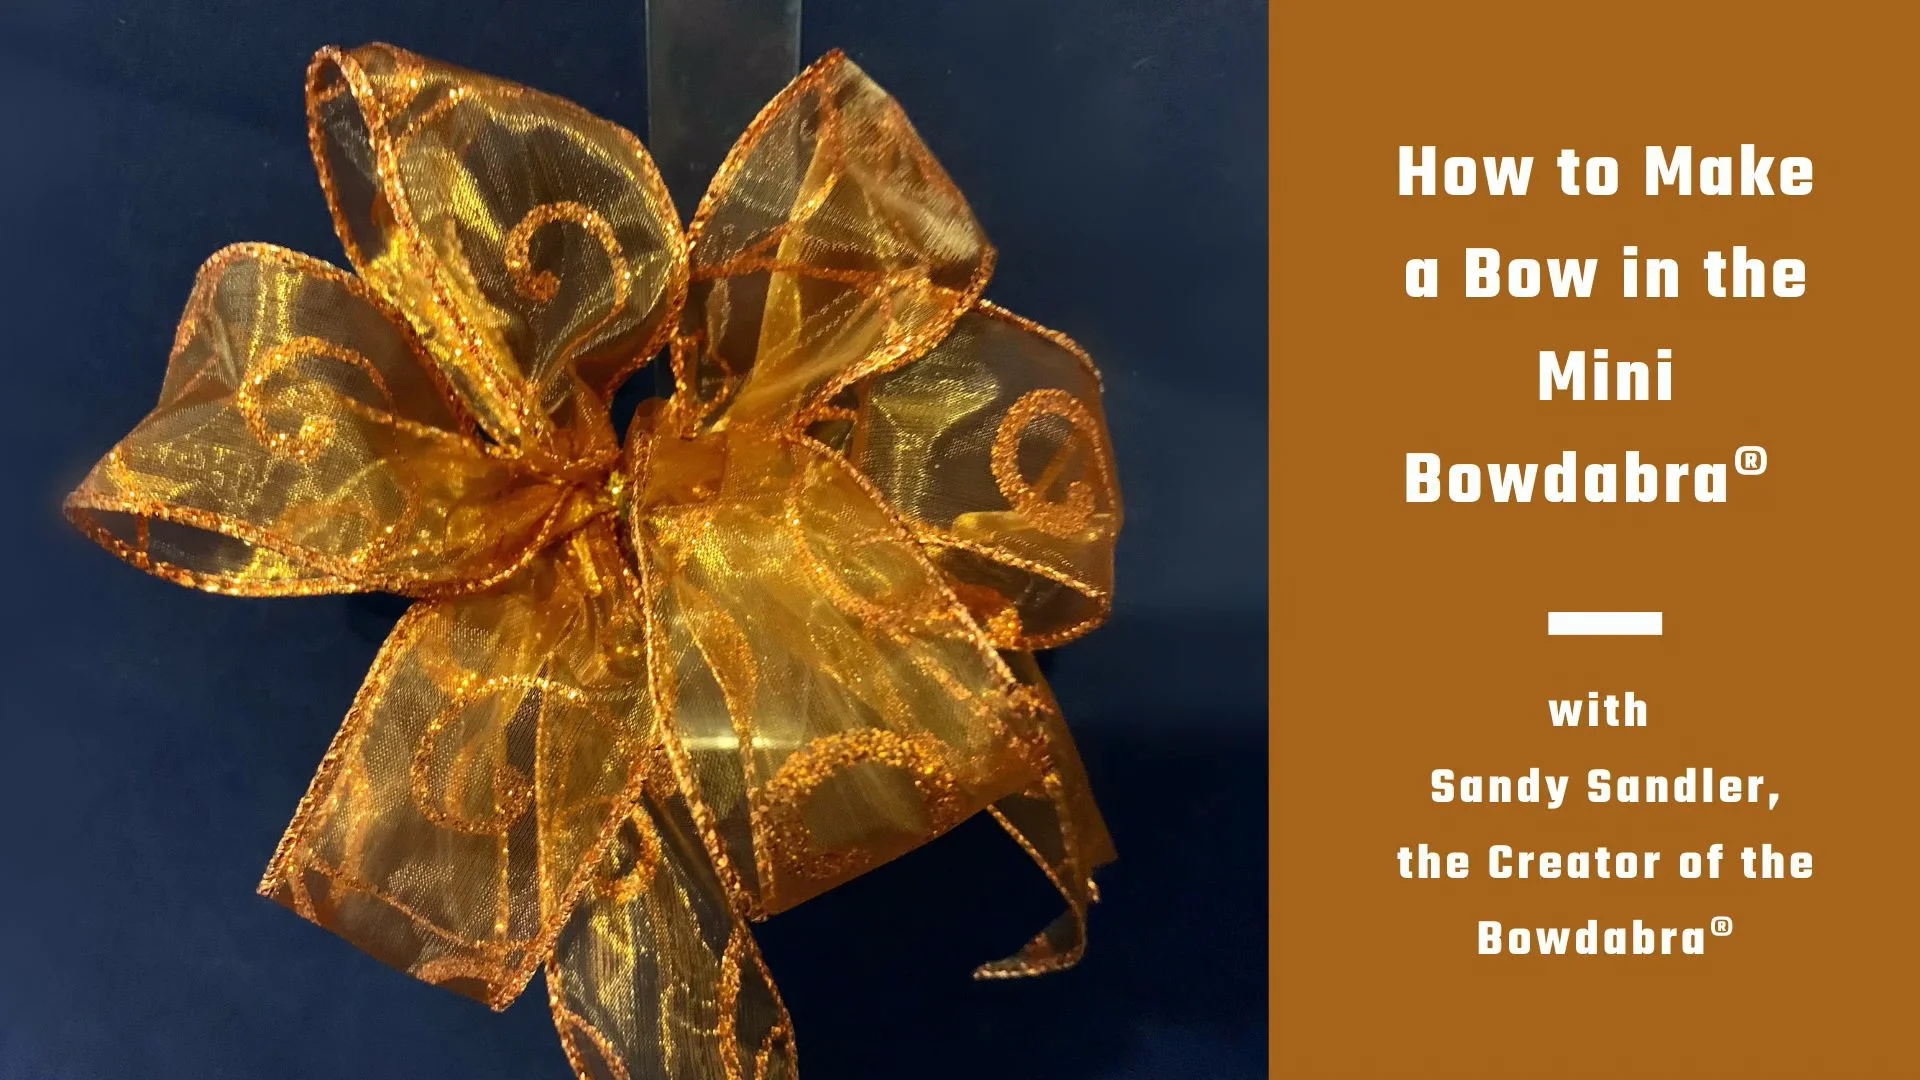 How to make a bow in the Mini Bowdabra on Vimeo